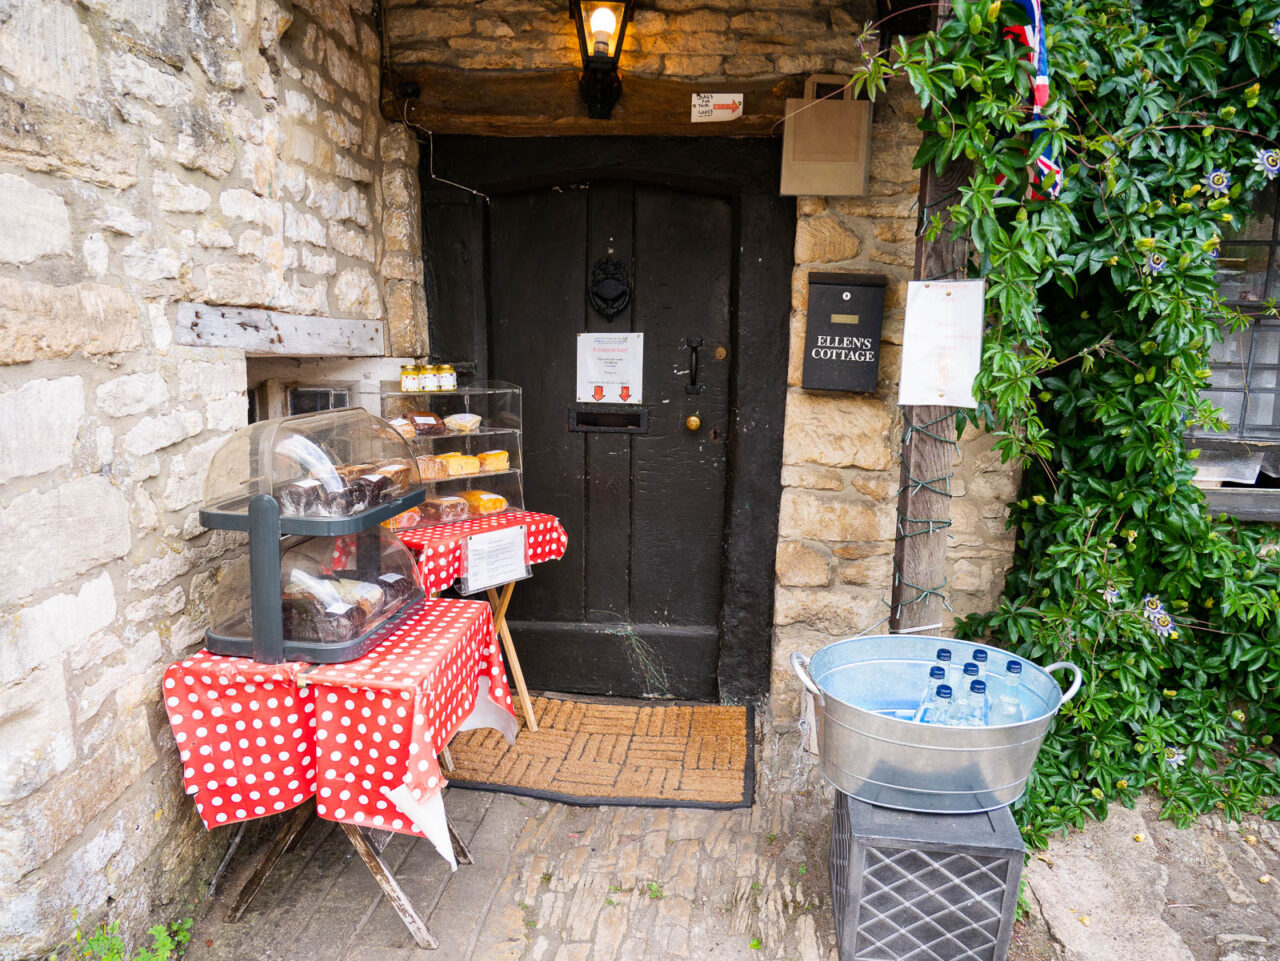 Snacks and water outside Ellen's Cottage, Castle Combe